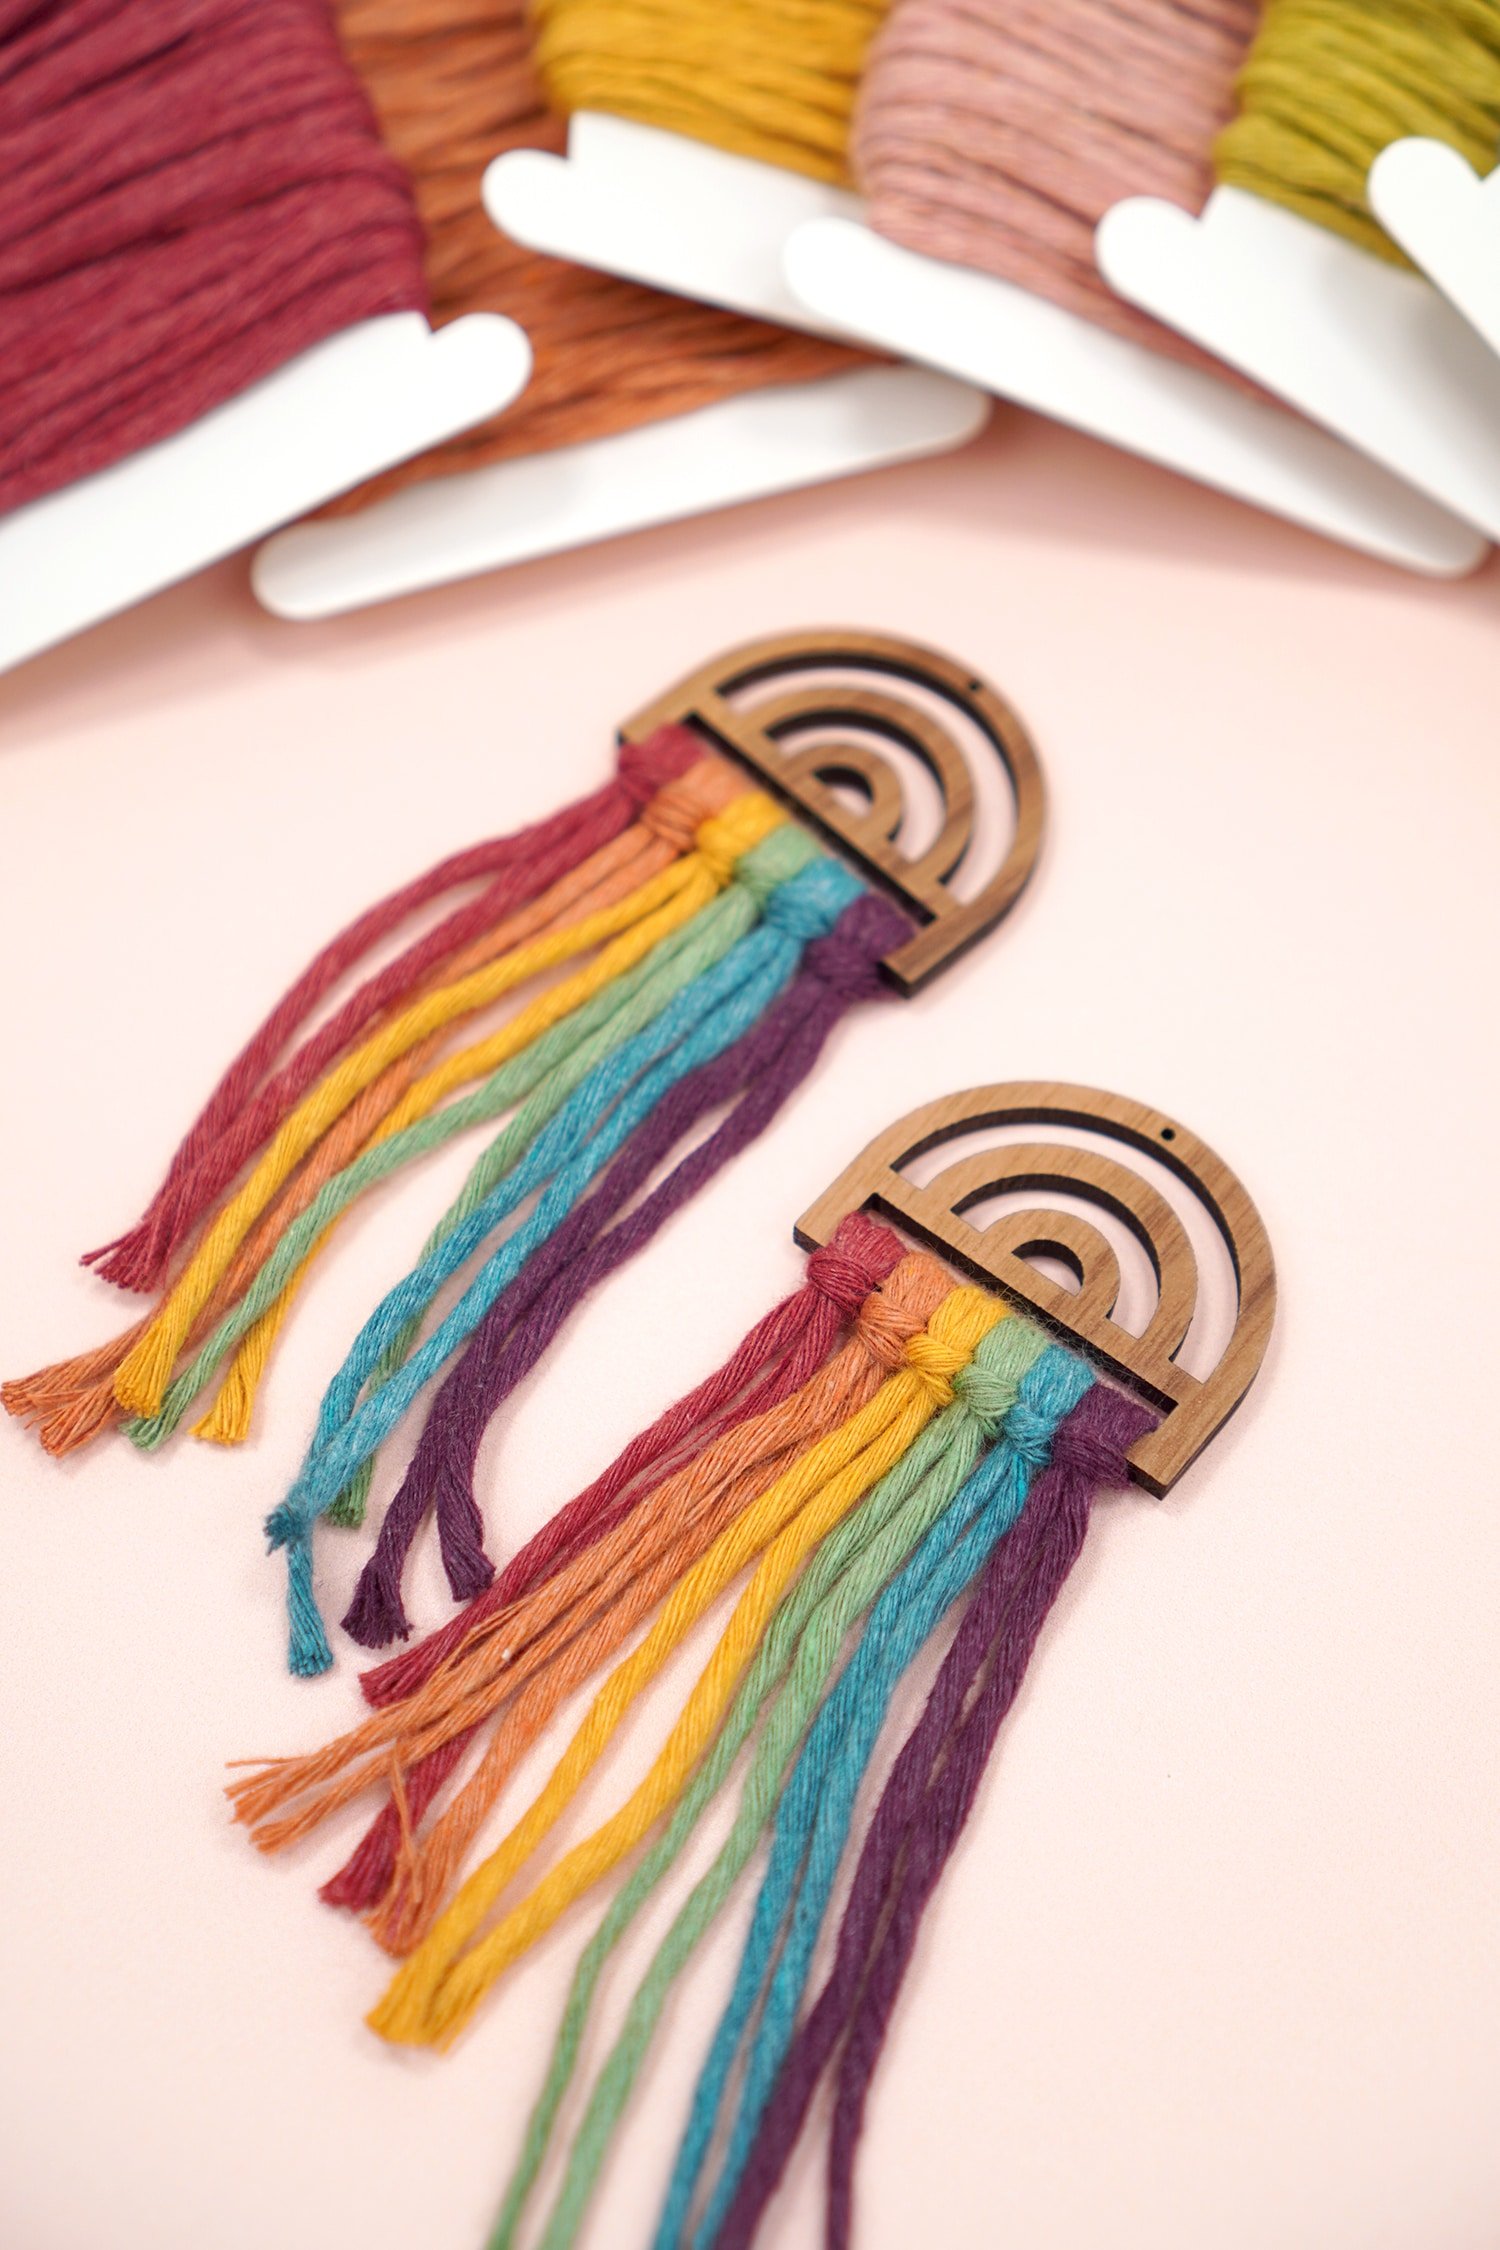 Untrimmed Rainbow Macrame Earrings on peach background with macrame cord